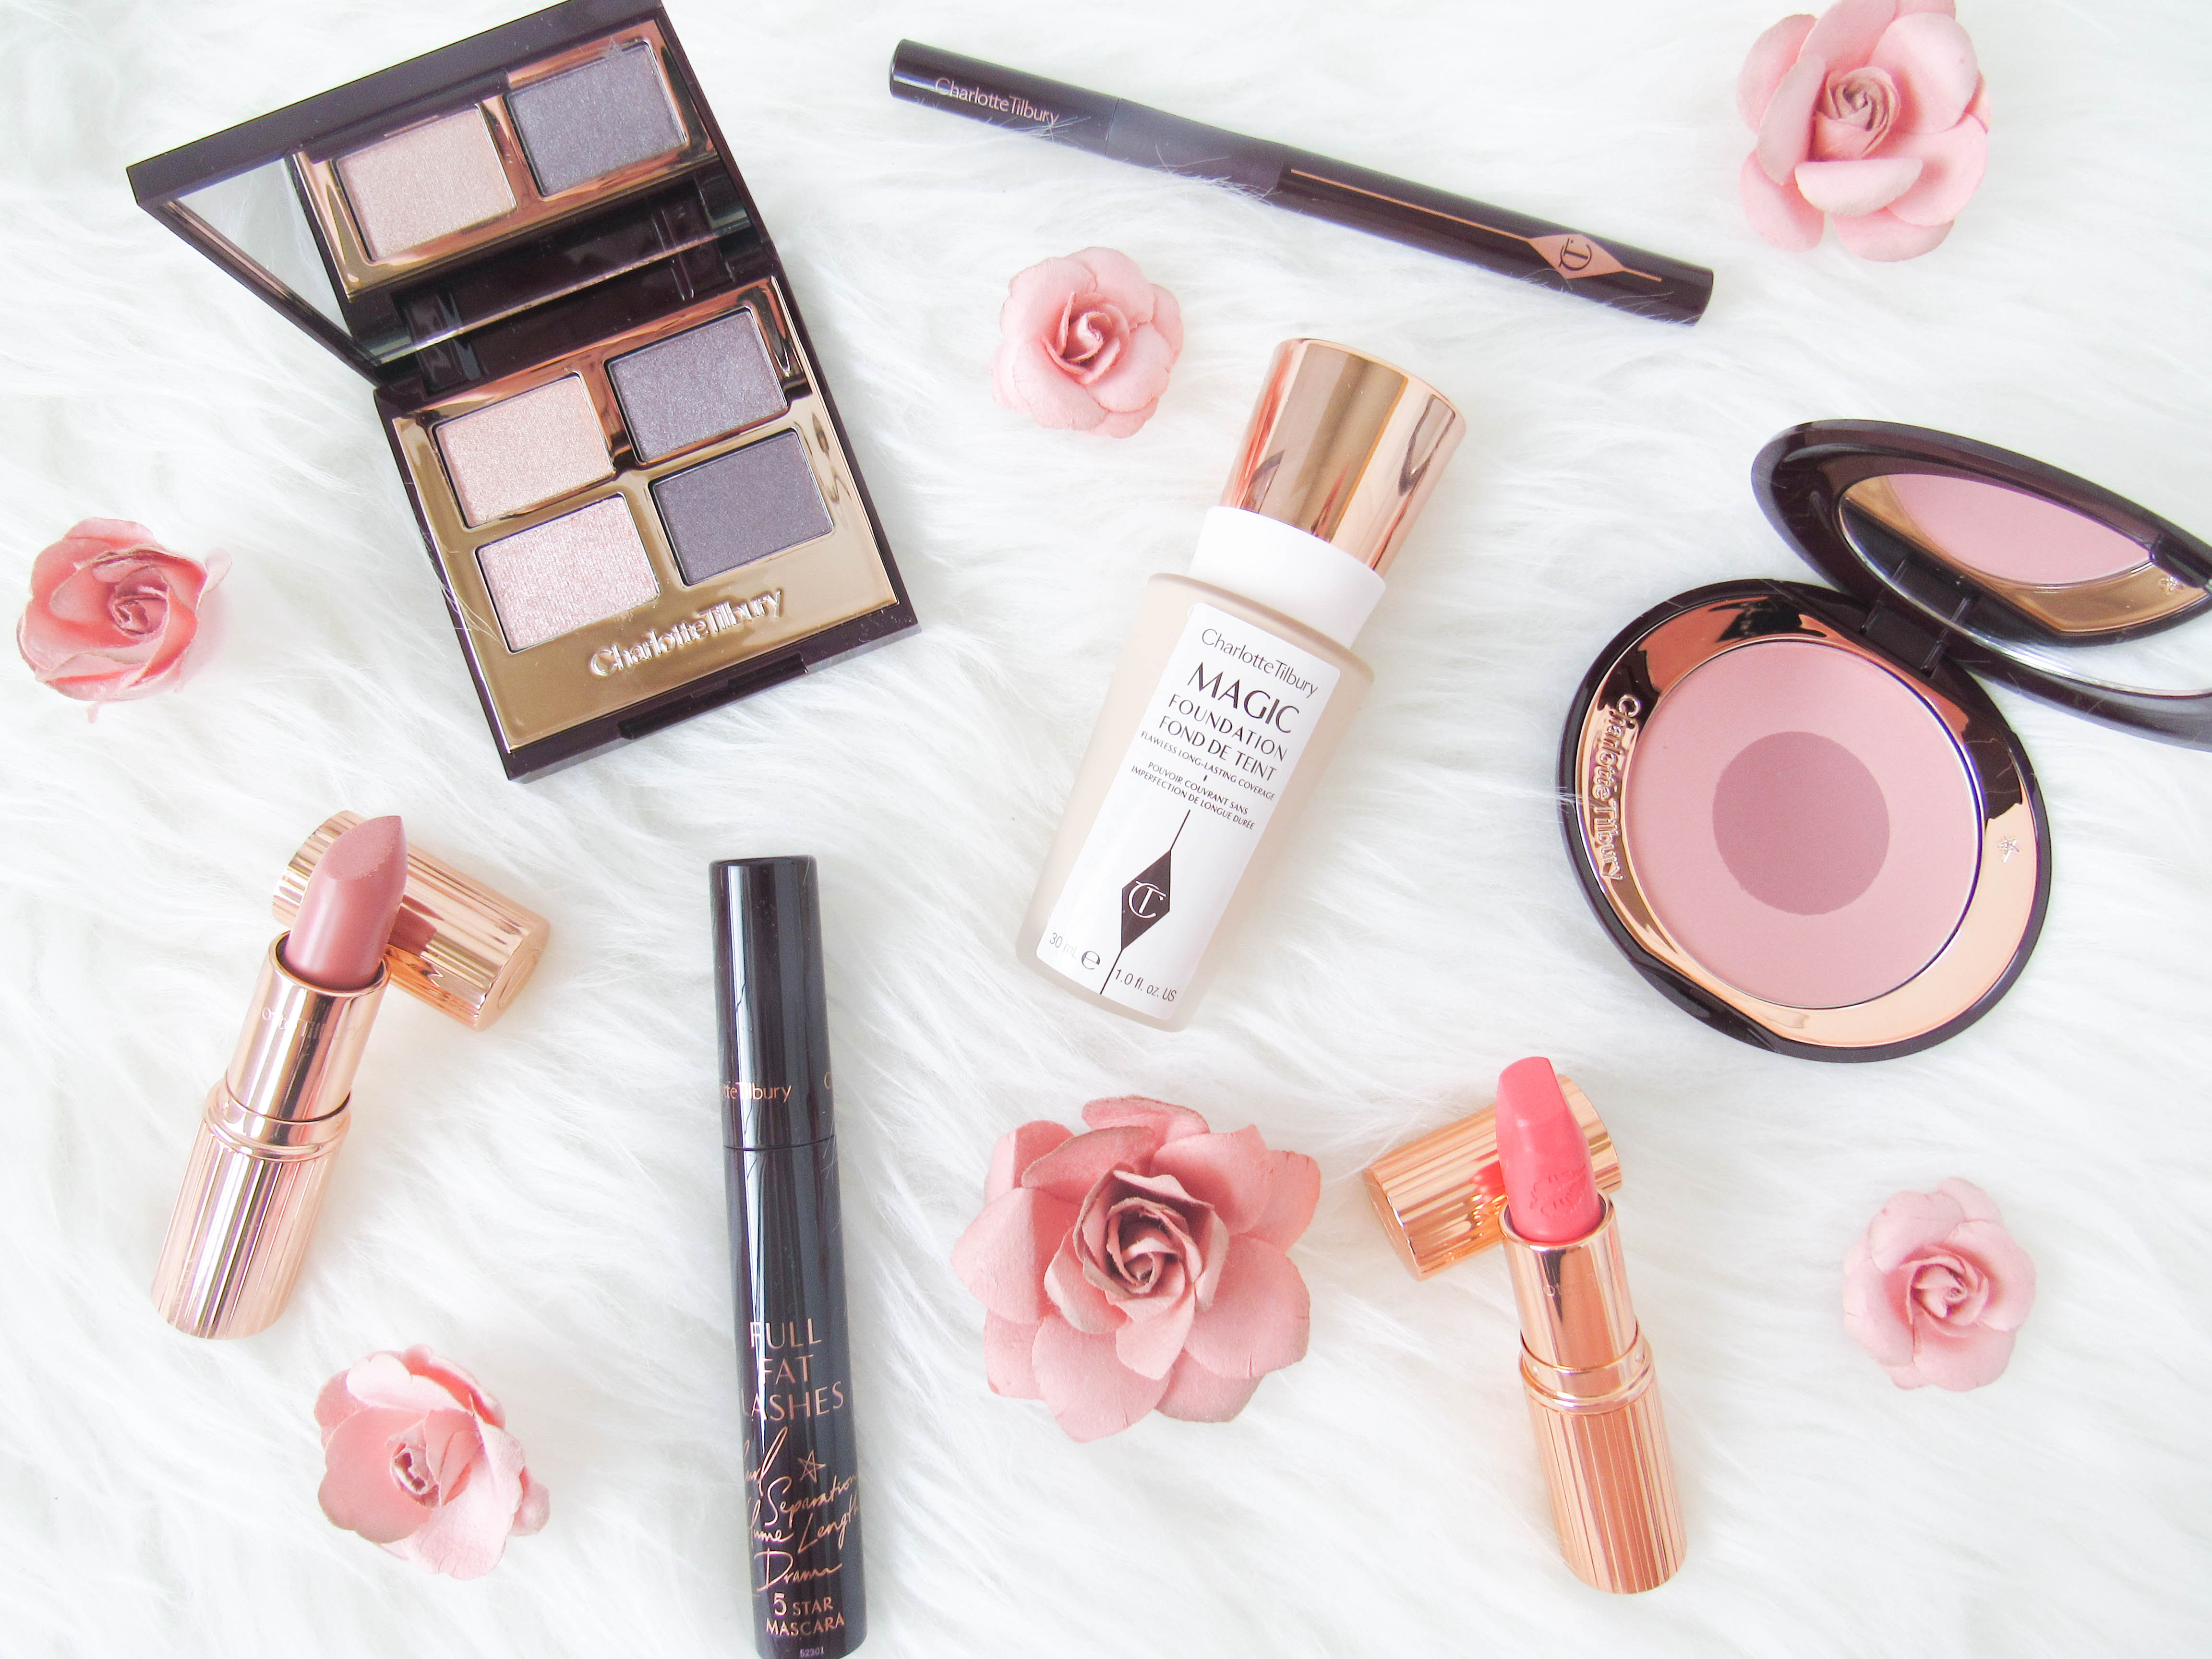 My Favourite Products from Charlotte Tilbury